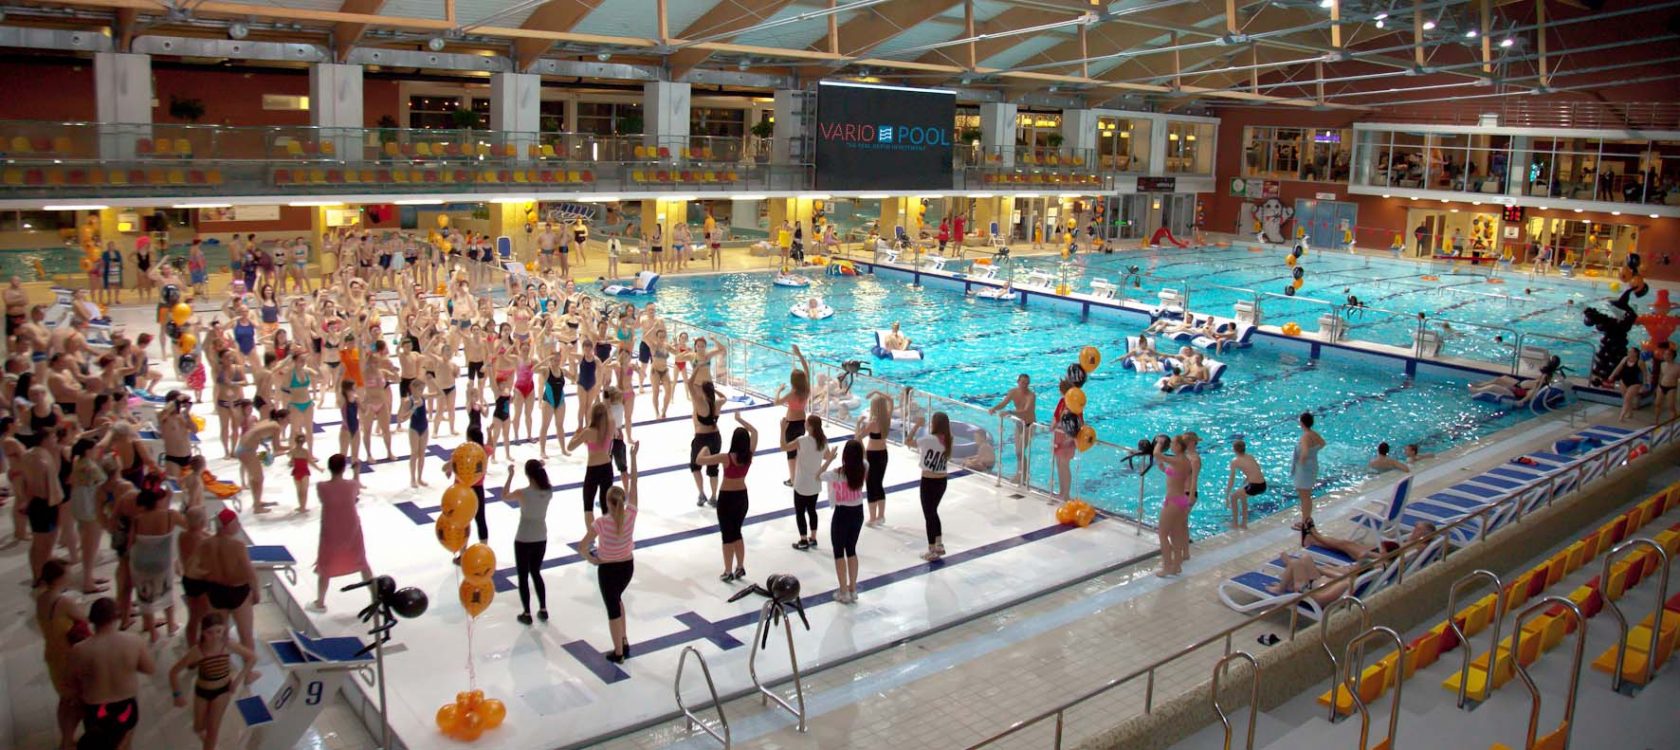 Swimming pool in Erbendorf opened for public